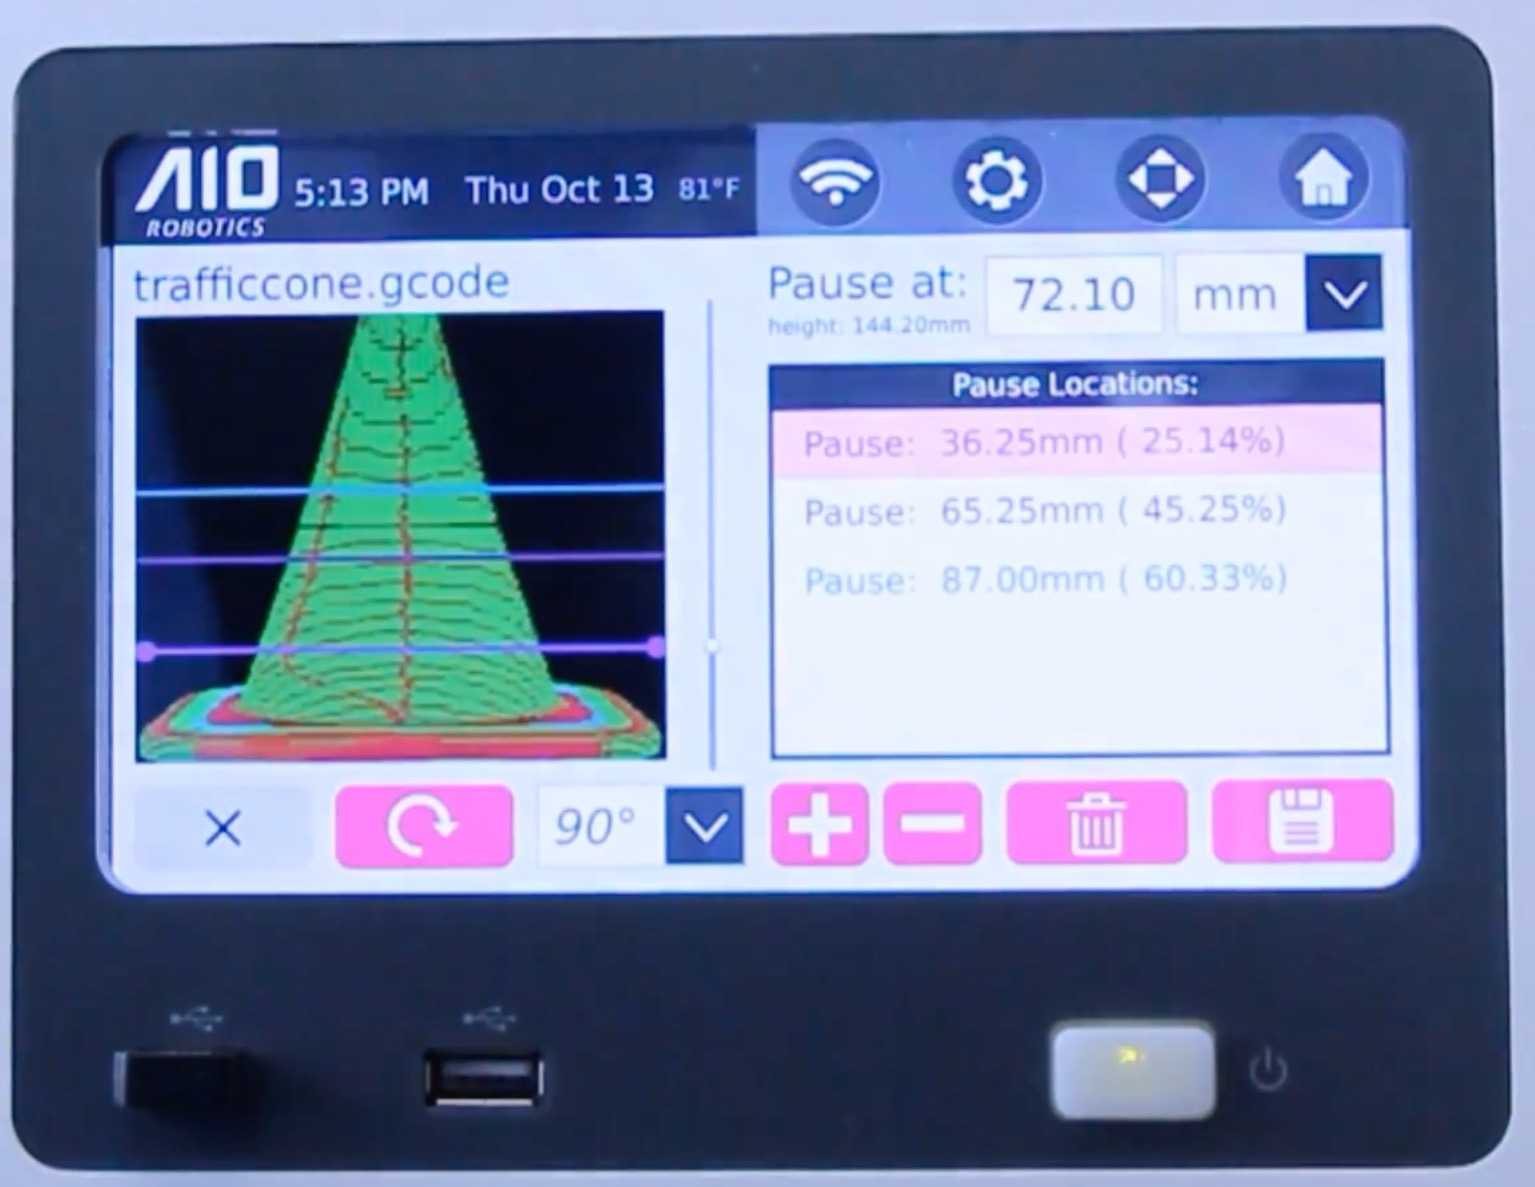  AIO Robotics' pause editor appears on their touch screen 